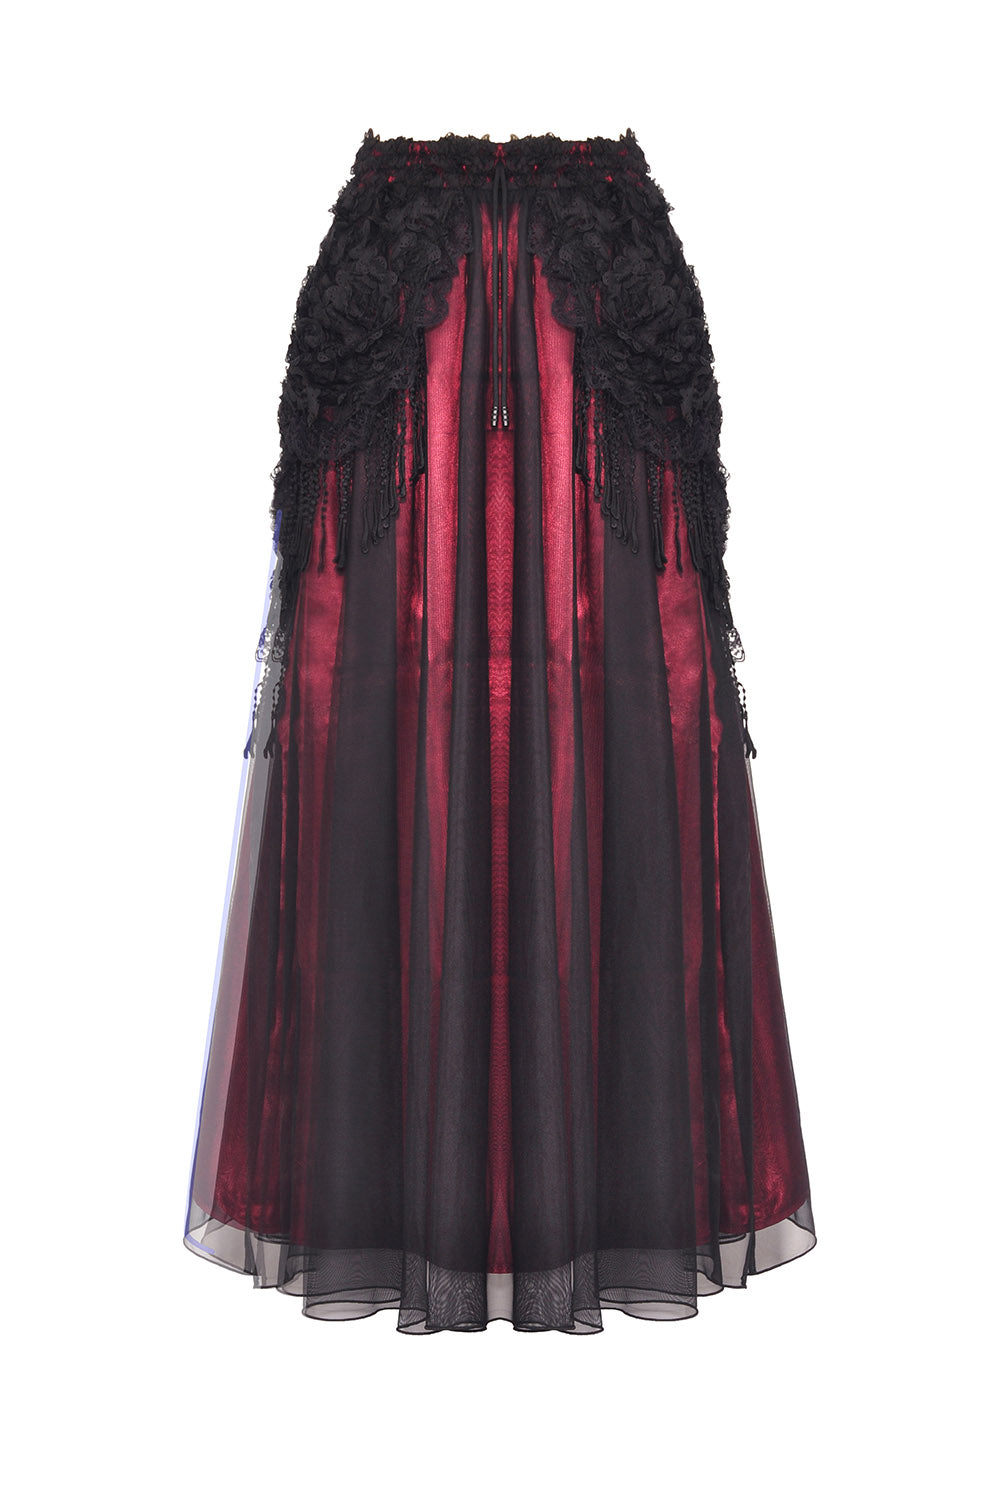 womens black and red tulle skirt